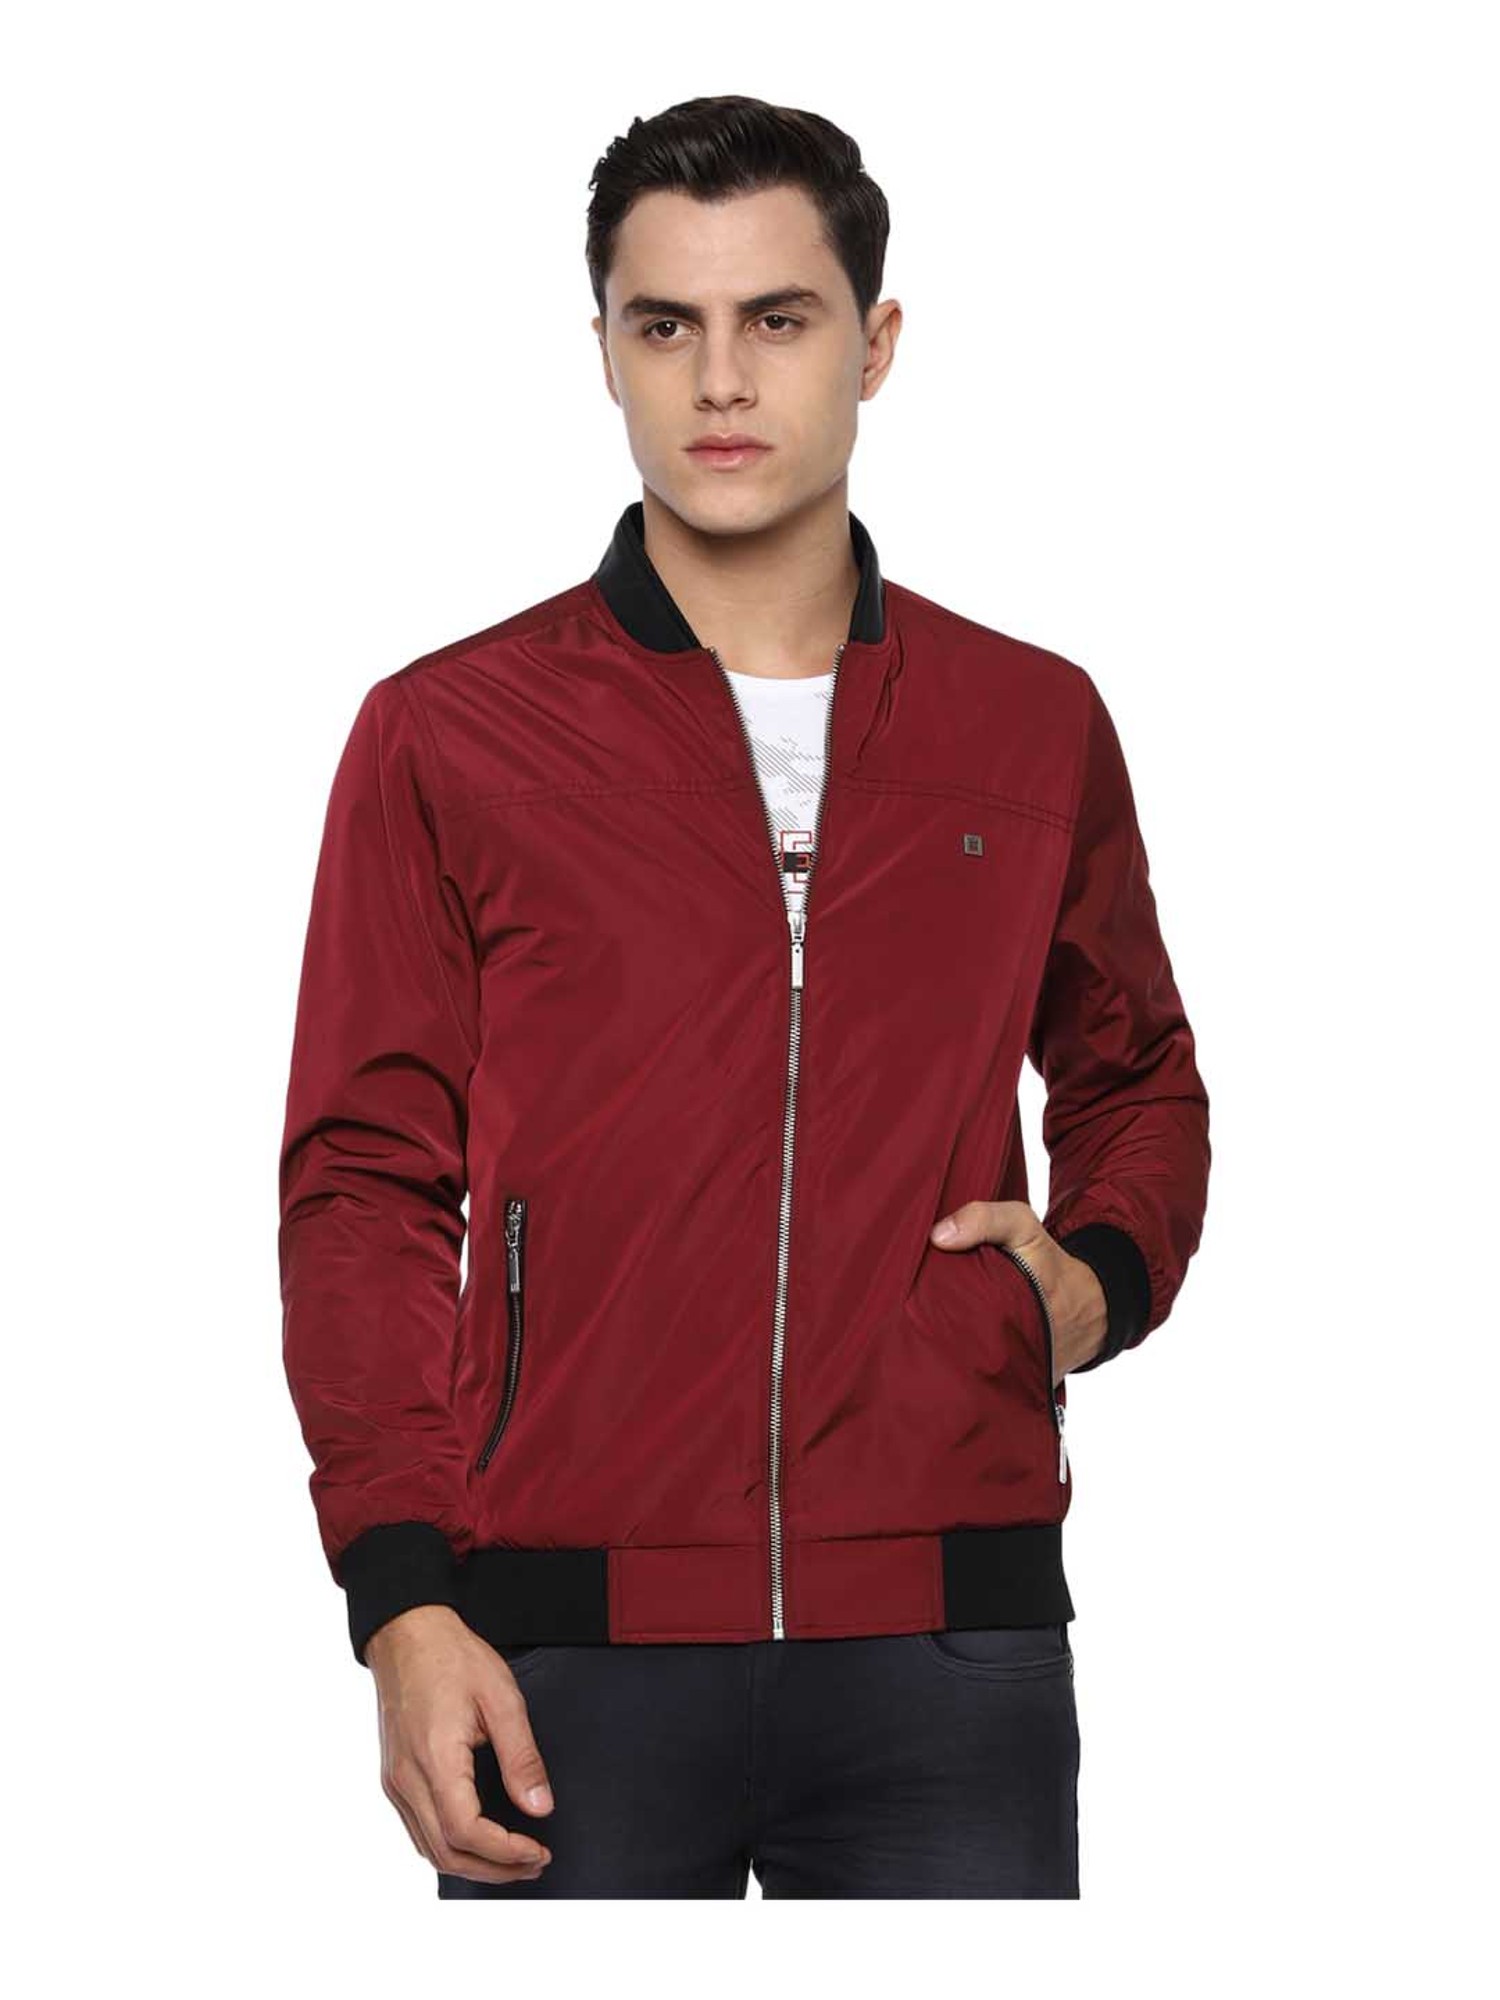 LP Jeans by Louis Philippe Full Sleeve Solid Men Jacket - Buy LP Jeans by  Louis Philippe Full Sleeve Solid Men Jacket Online at Best Prices in India